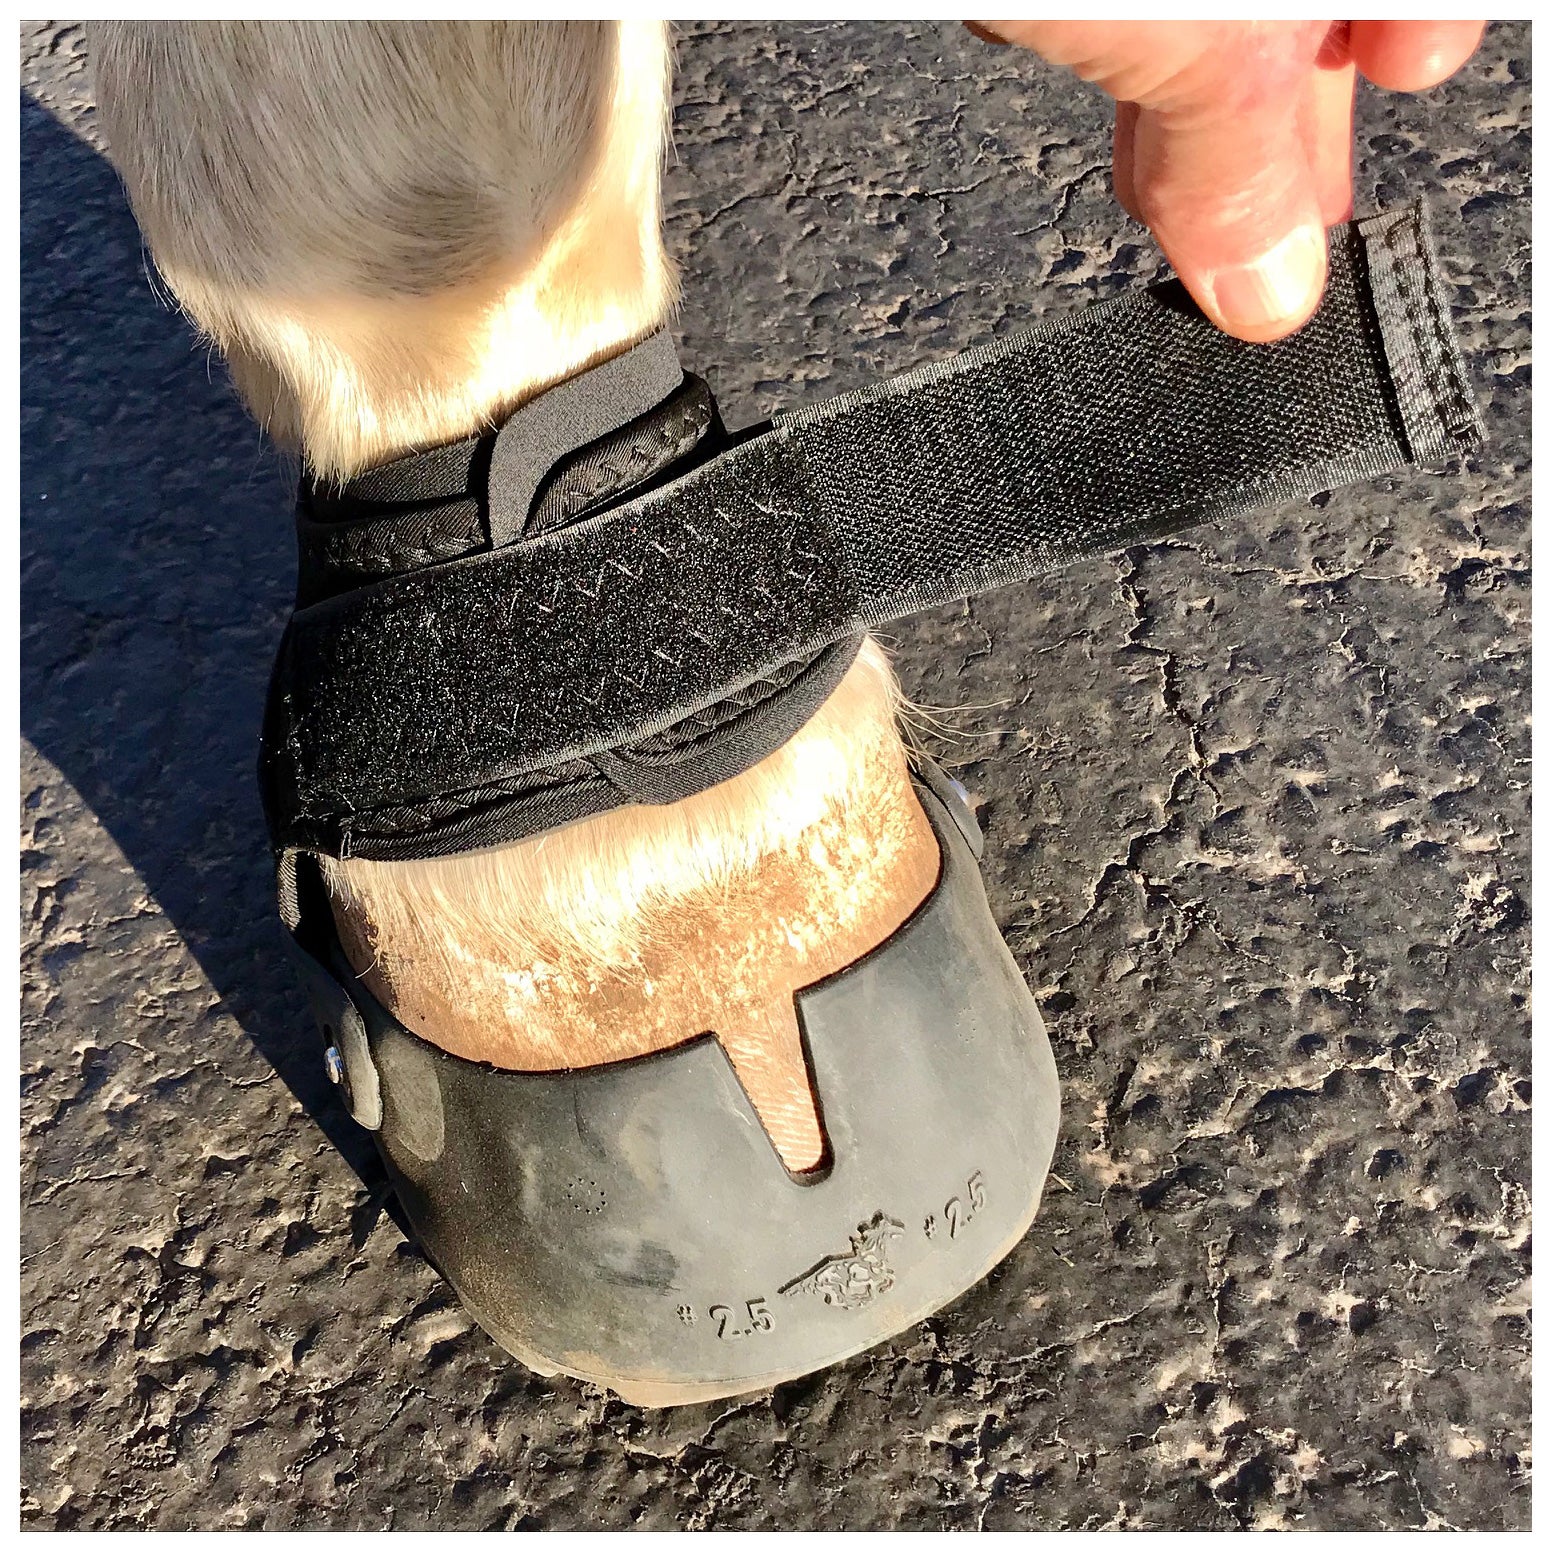 easy care hoof boots